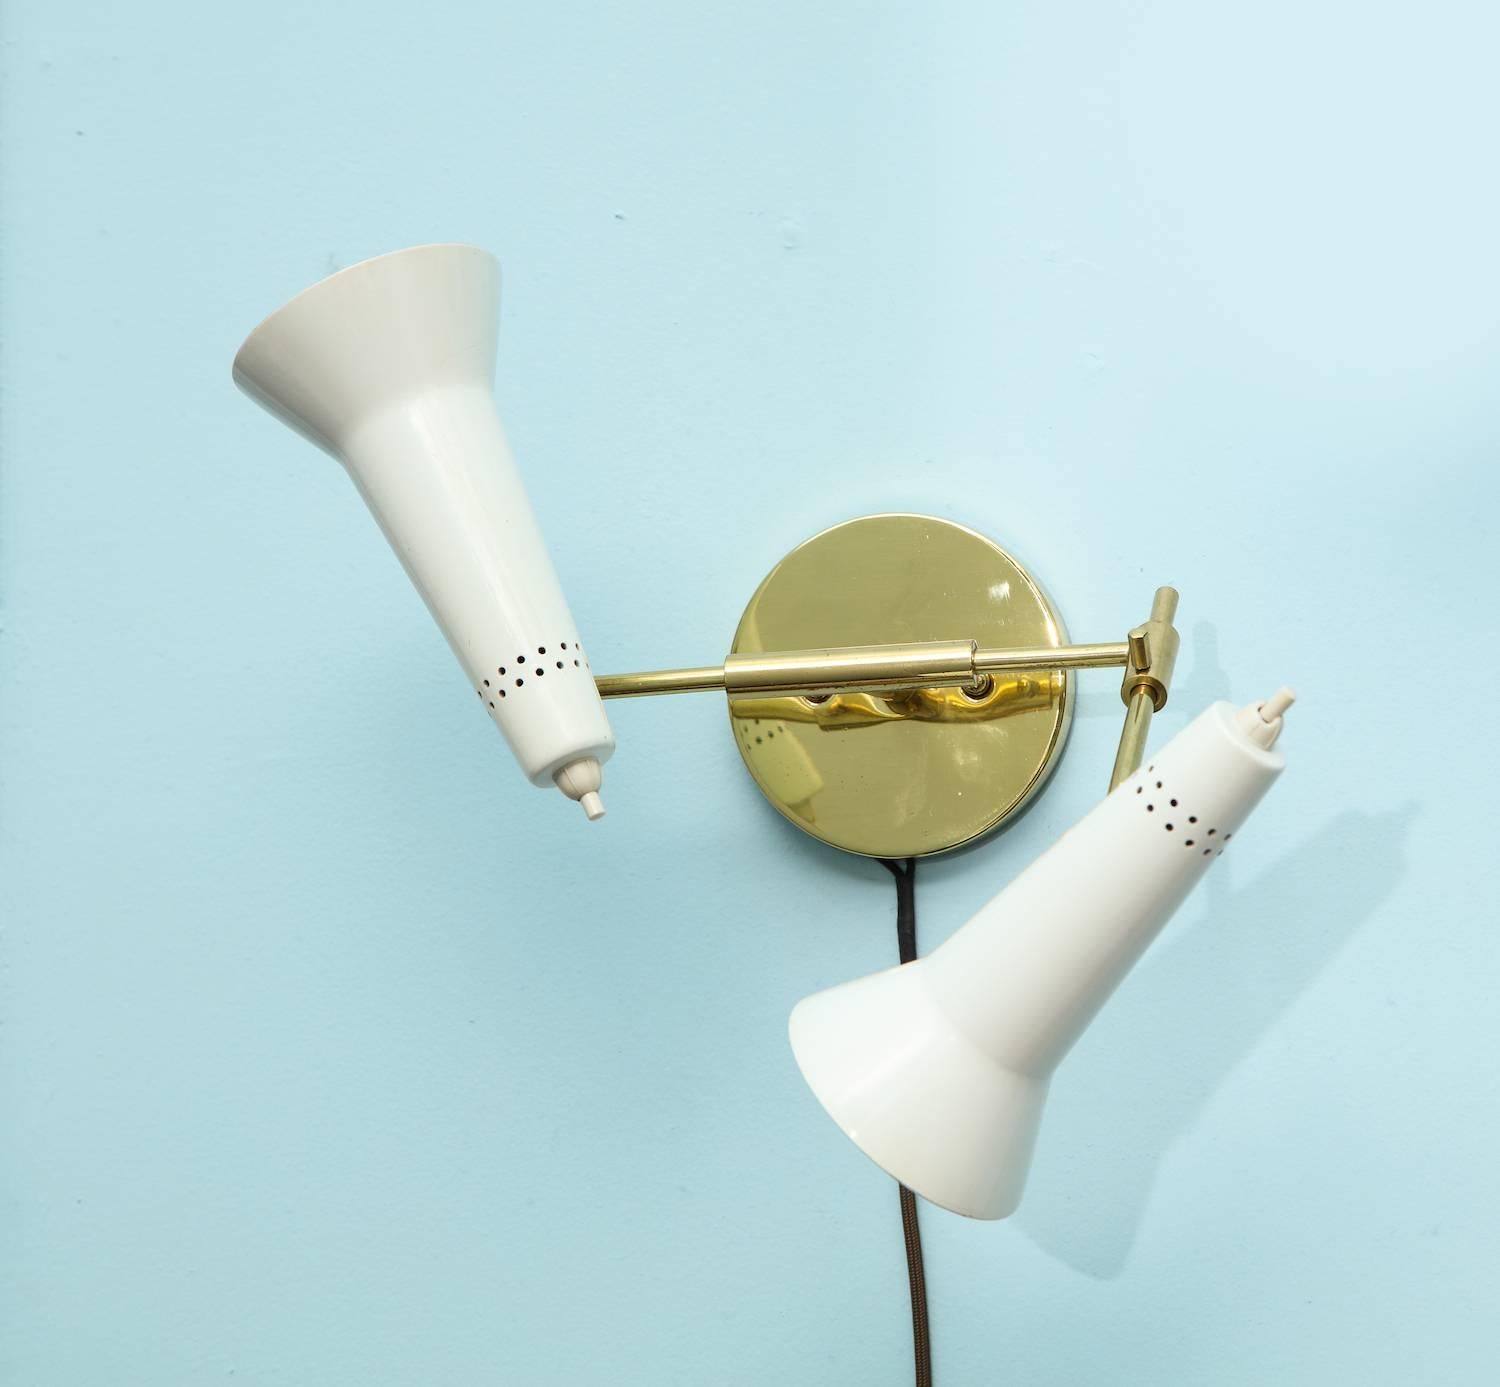 Rare pair of #169/2 sconces by Gino Sarfatti.
Rare pair of two-light sconces with articulating arms and shades. White-painted metal cone shades and adjustable brass arms and mounts. As these sconces move in a number of directions, the measurements